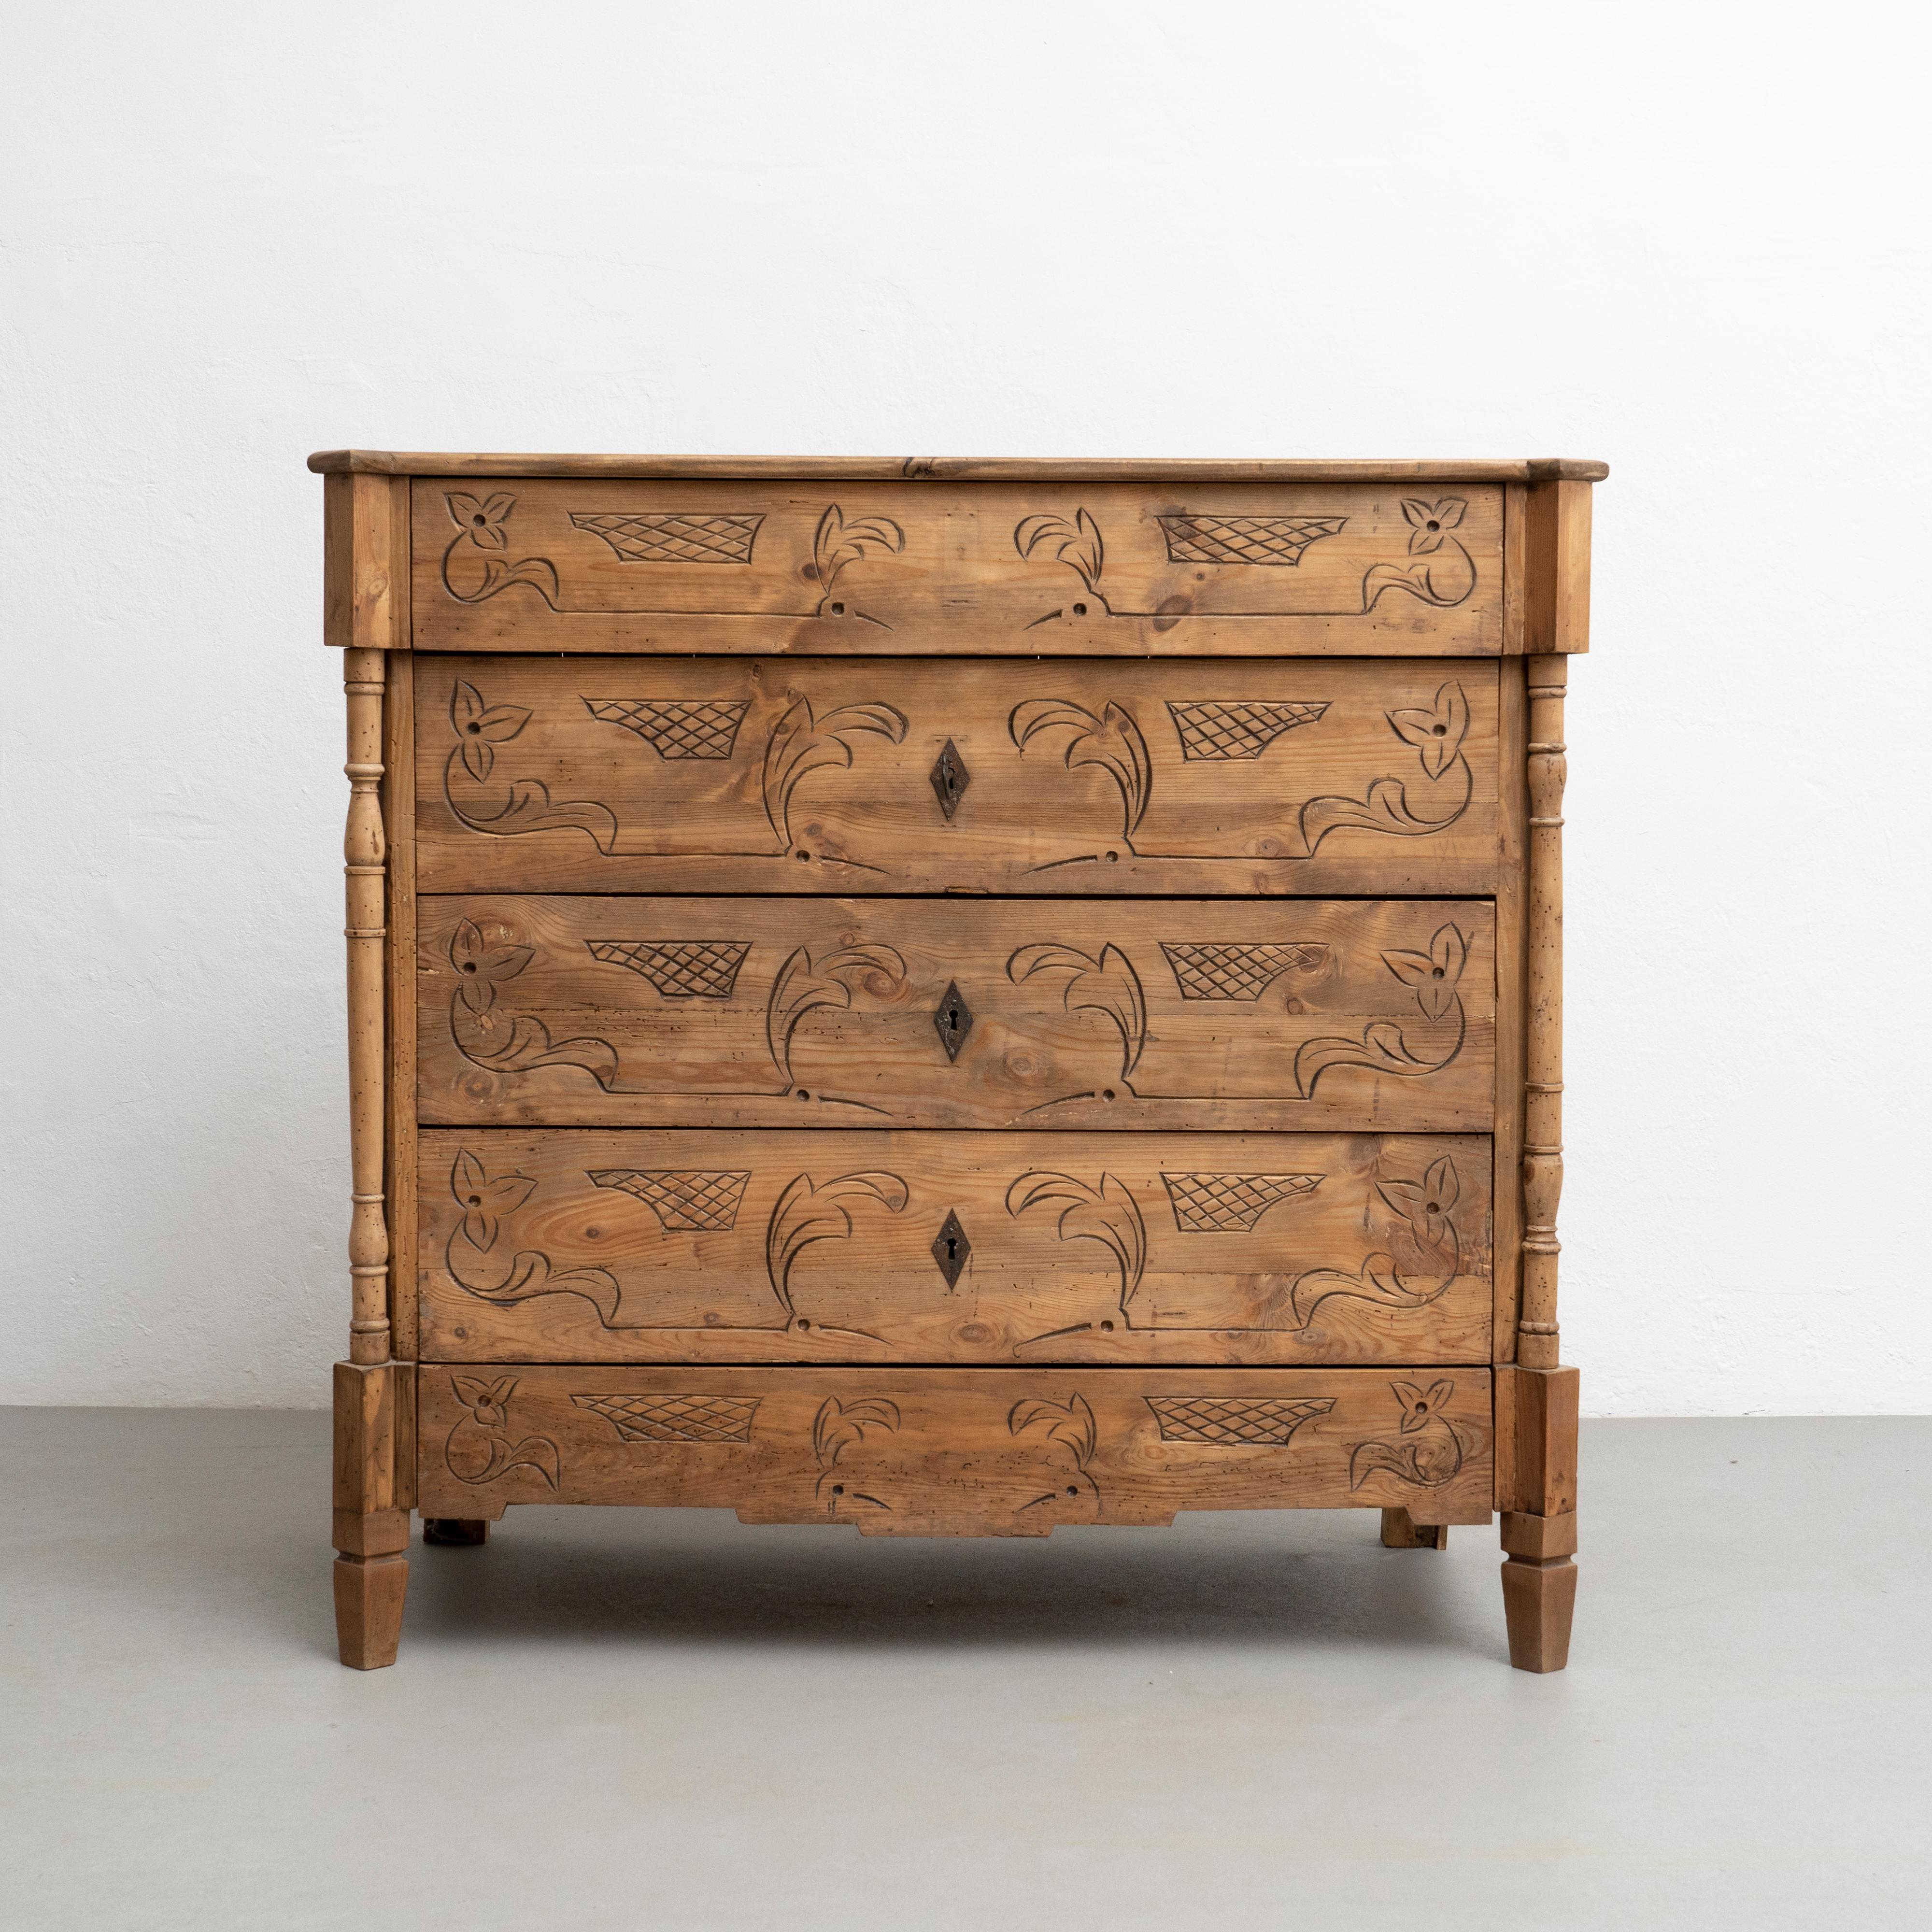 Traditional rustic pinewood dresser.

Made by unknown artisan from Spain, circa 1930.

In original condition, with minor wear consistent with age and use, preserving a beautiful patina.

Material:
Wood.
 